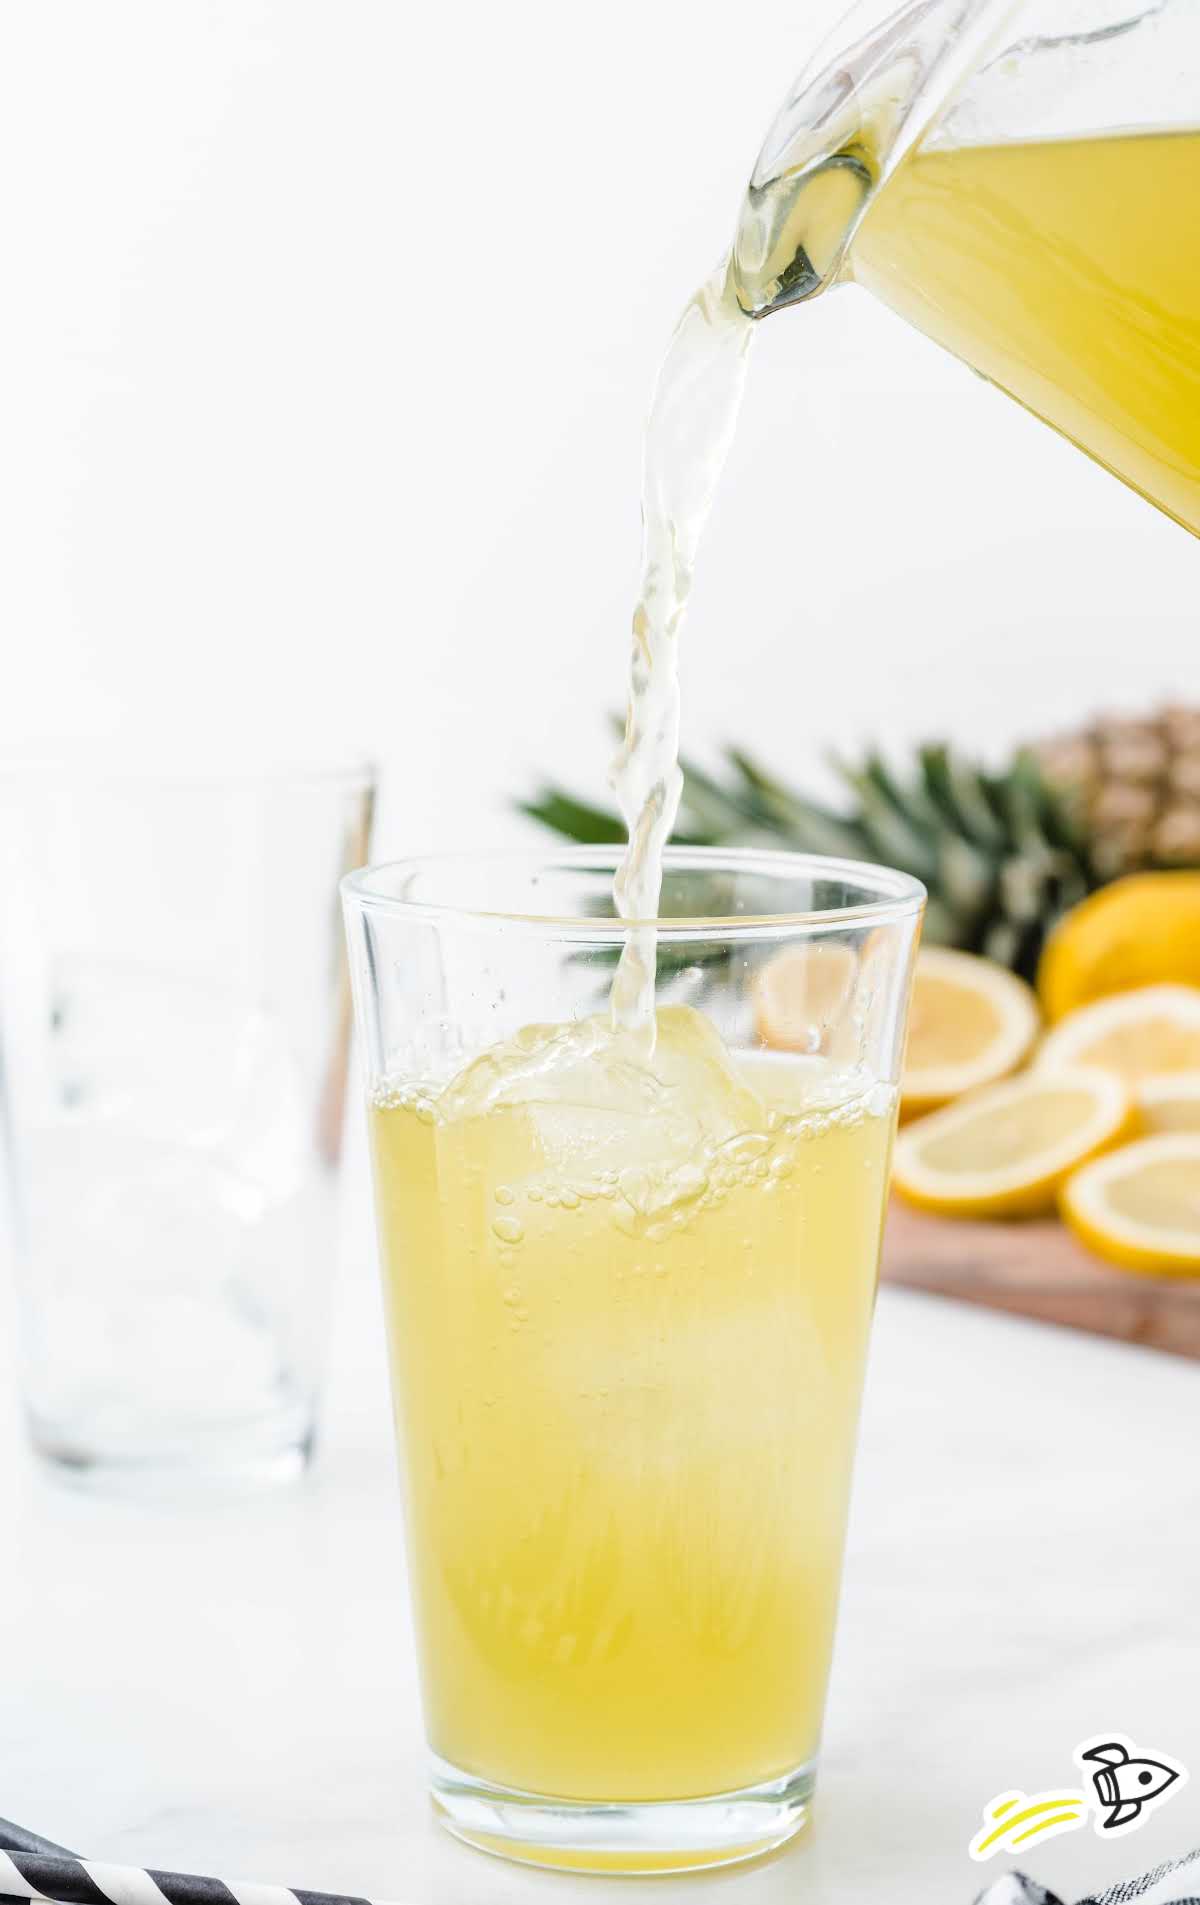 a pitcher of pineapple lemonade being poured into a glass of ice